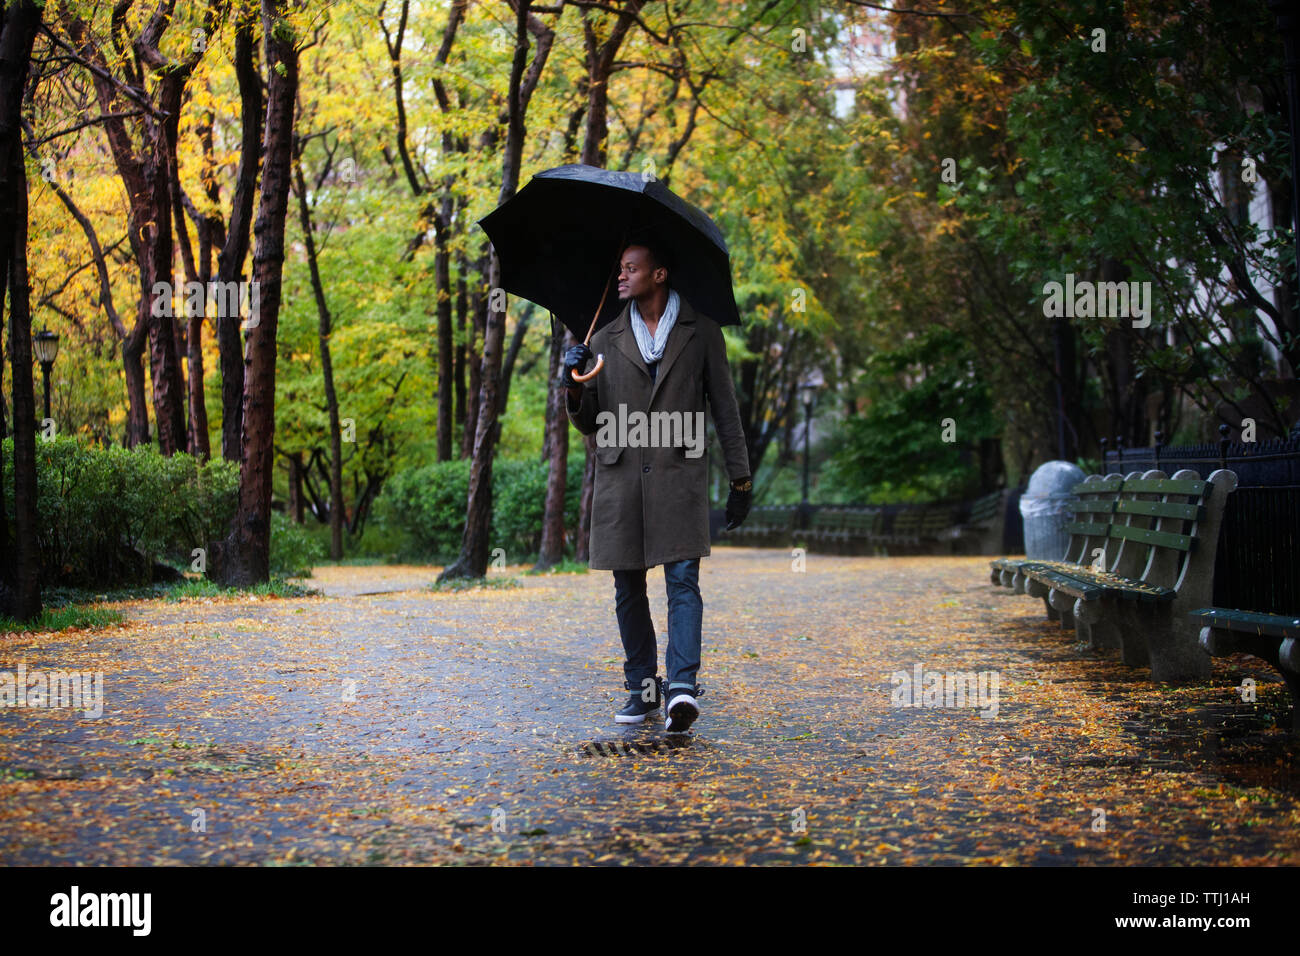 Man with umbrella walking on road in park Stock Photo